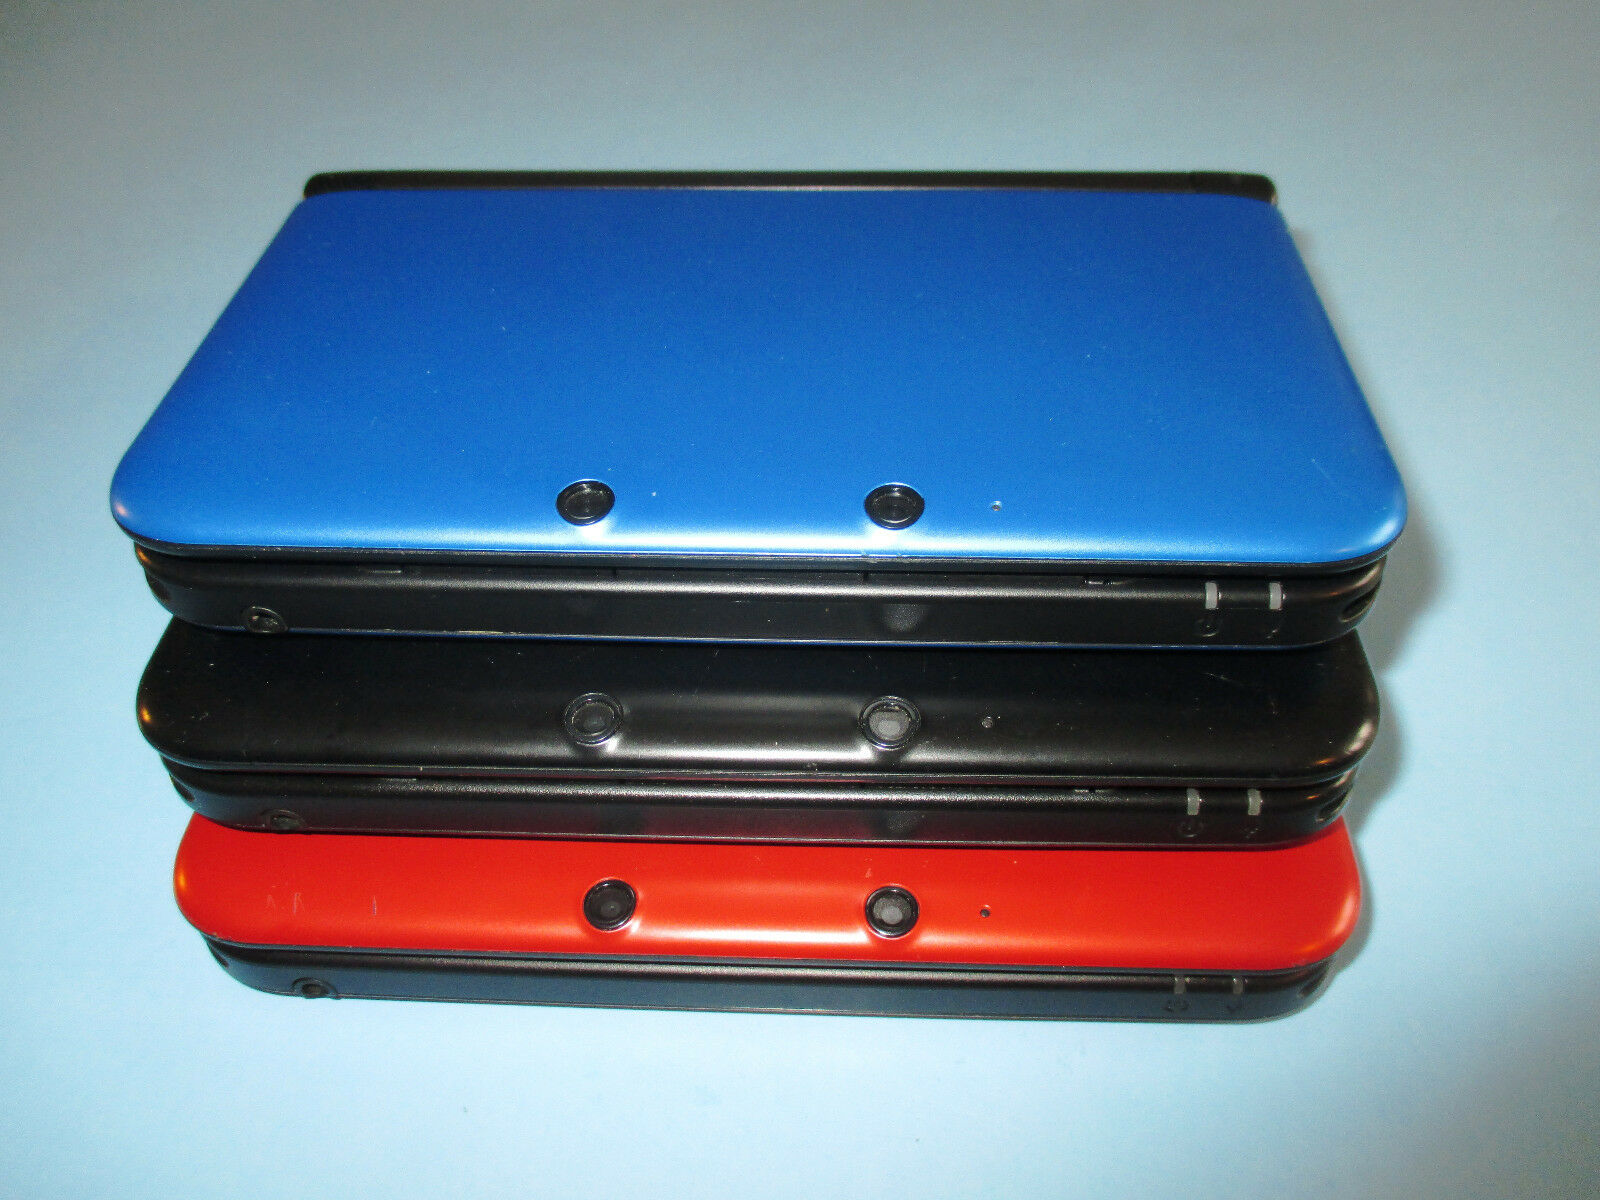 Nintendo 3ds Xl Systems You Pick Choose Your Color Free Ship!